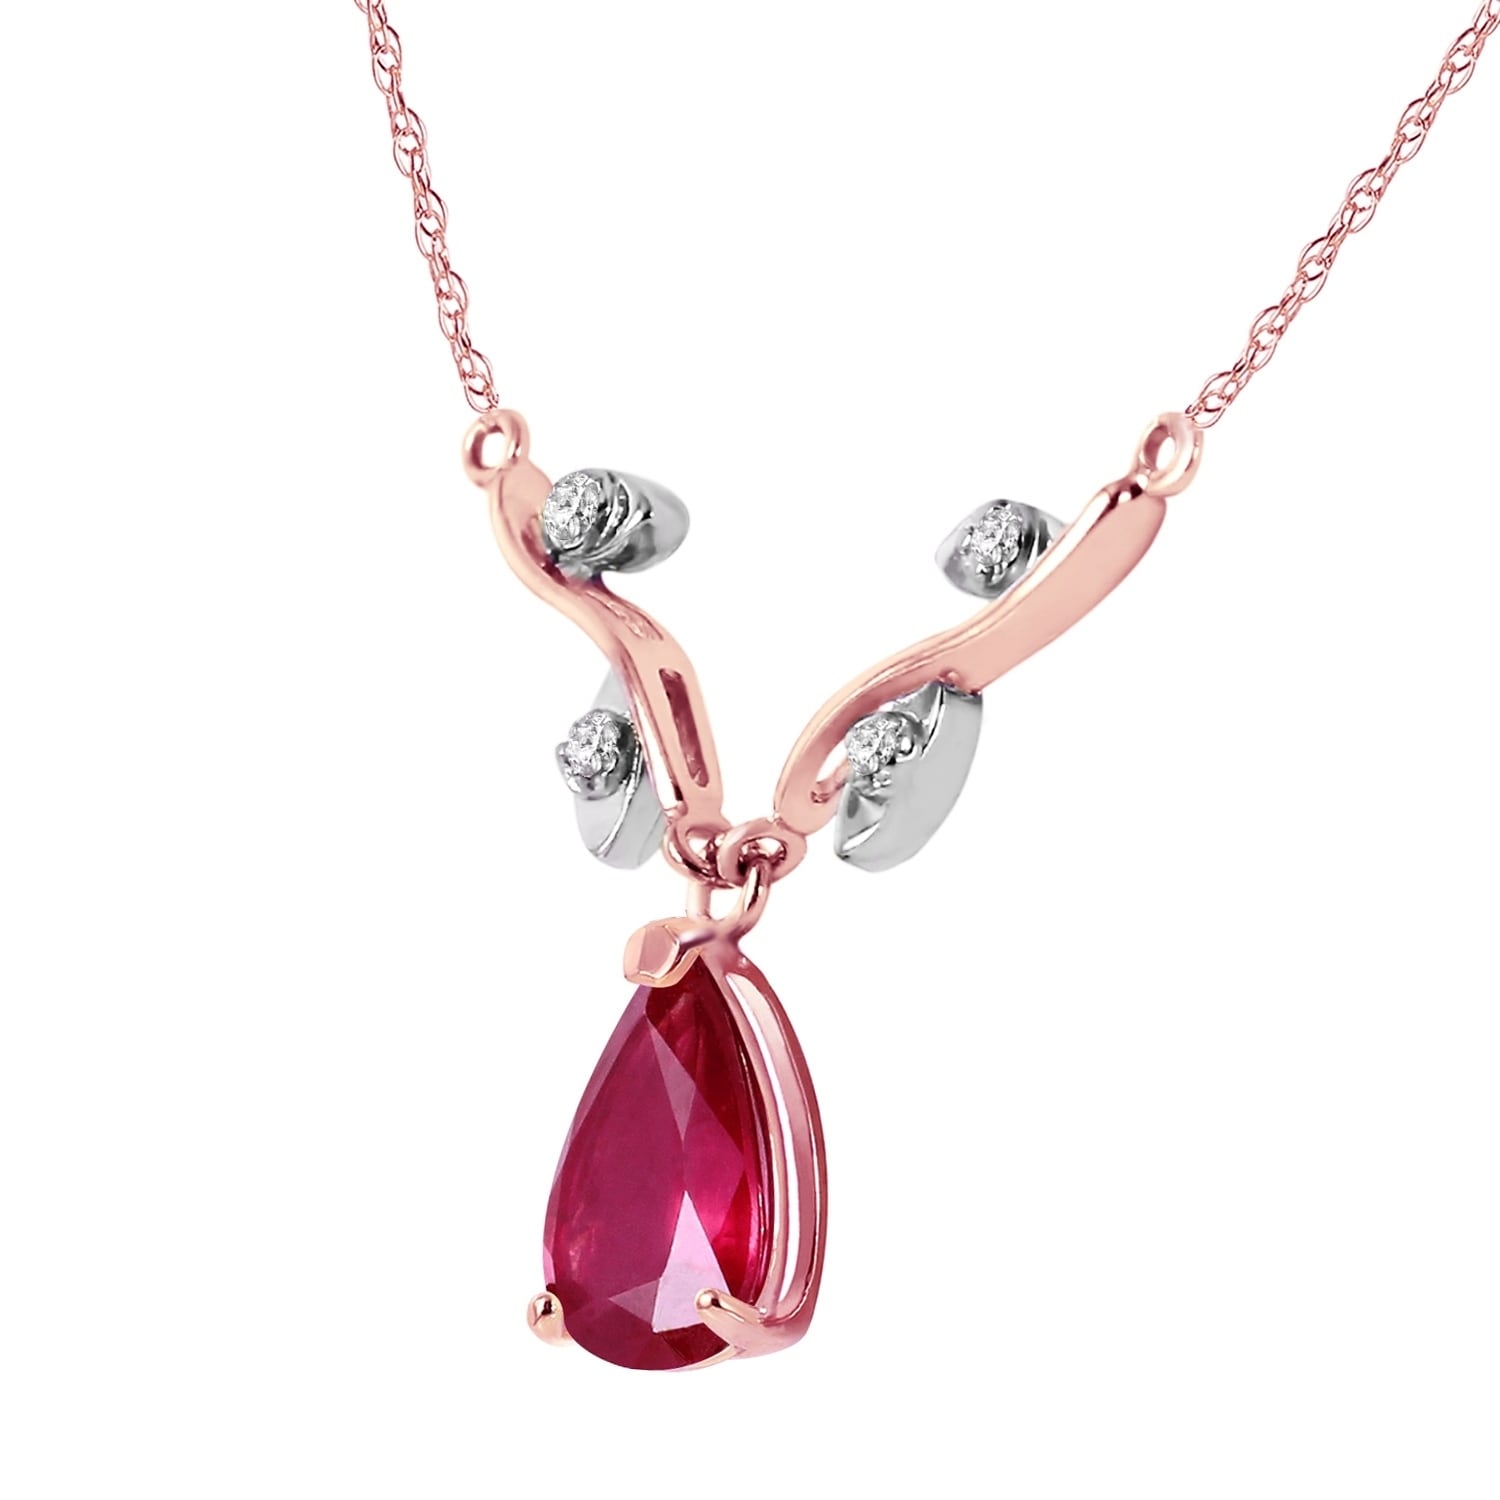 Details about   Ruby Gf Handmade Natural Gemstone Pendant 7.87 Ct 10k Rose Gold Jewelry